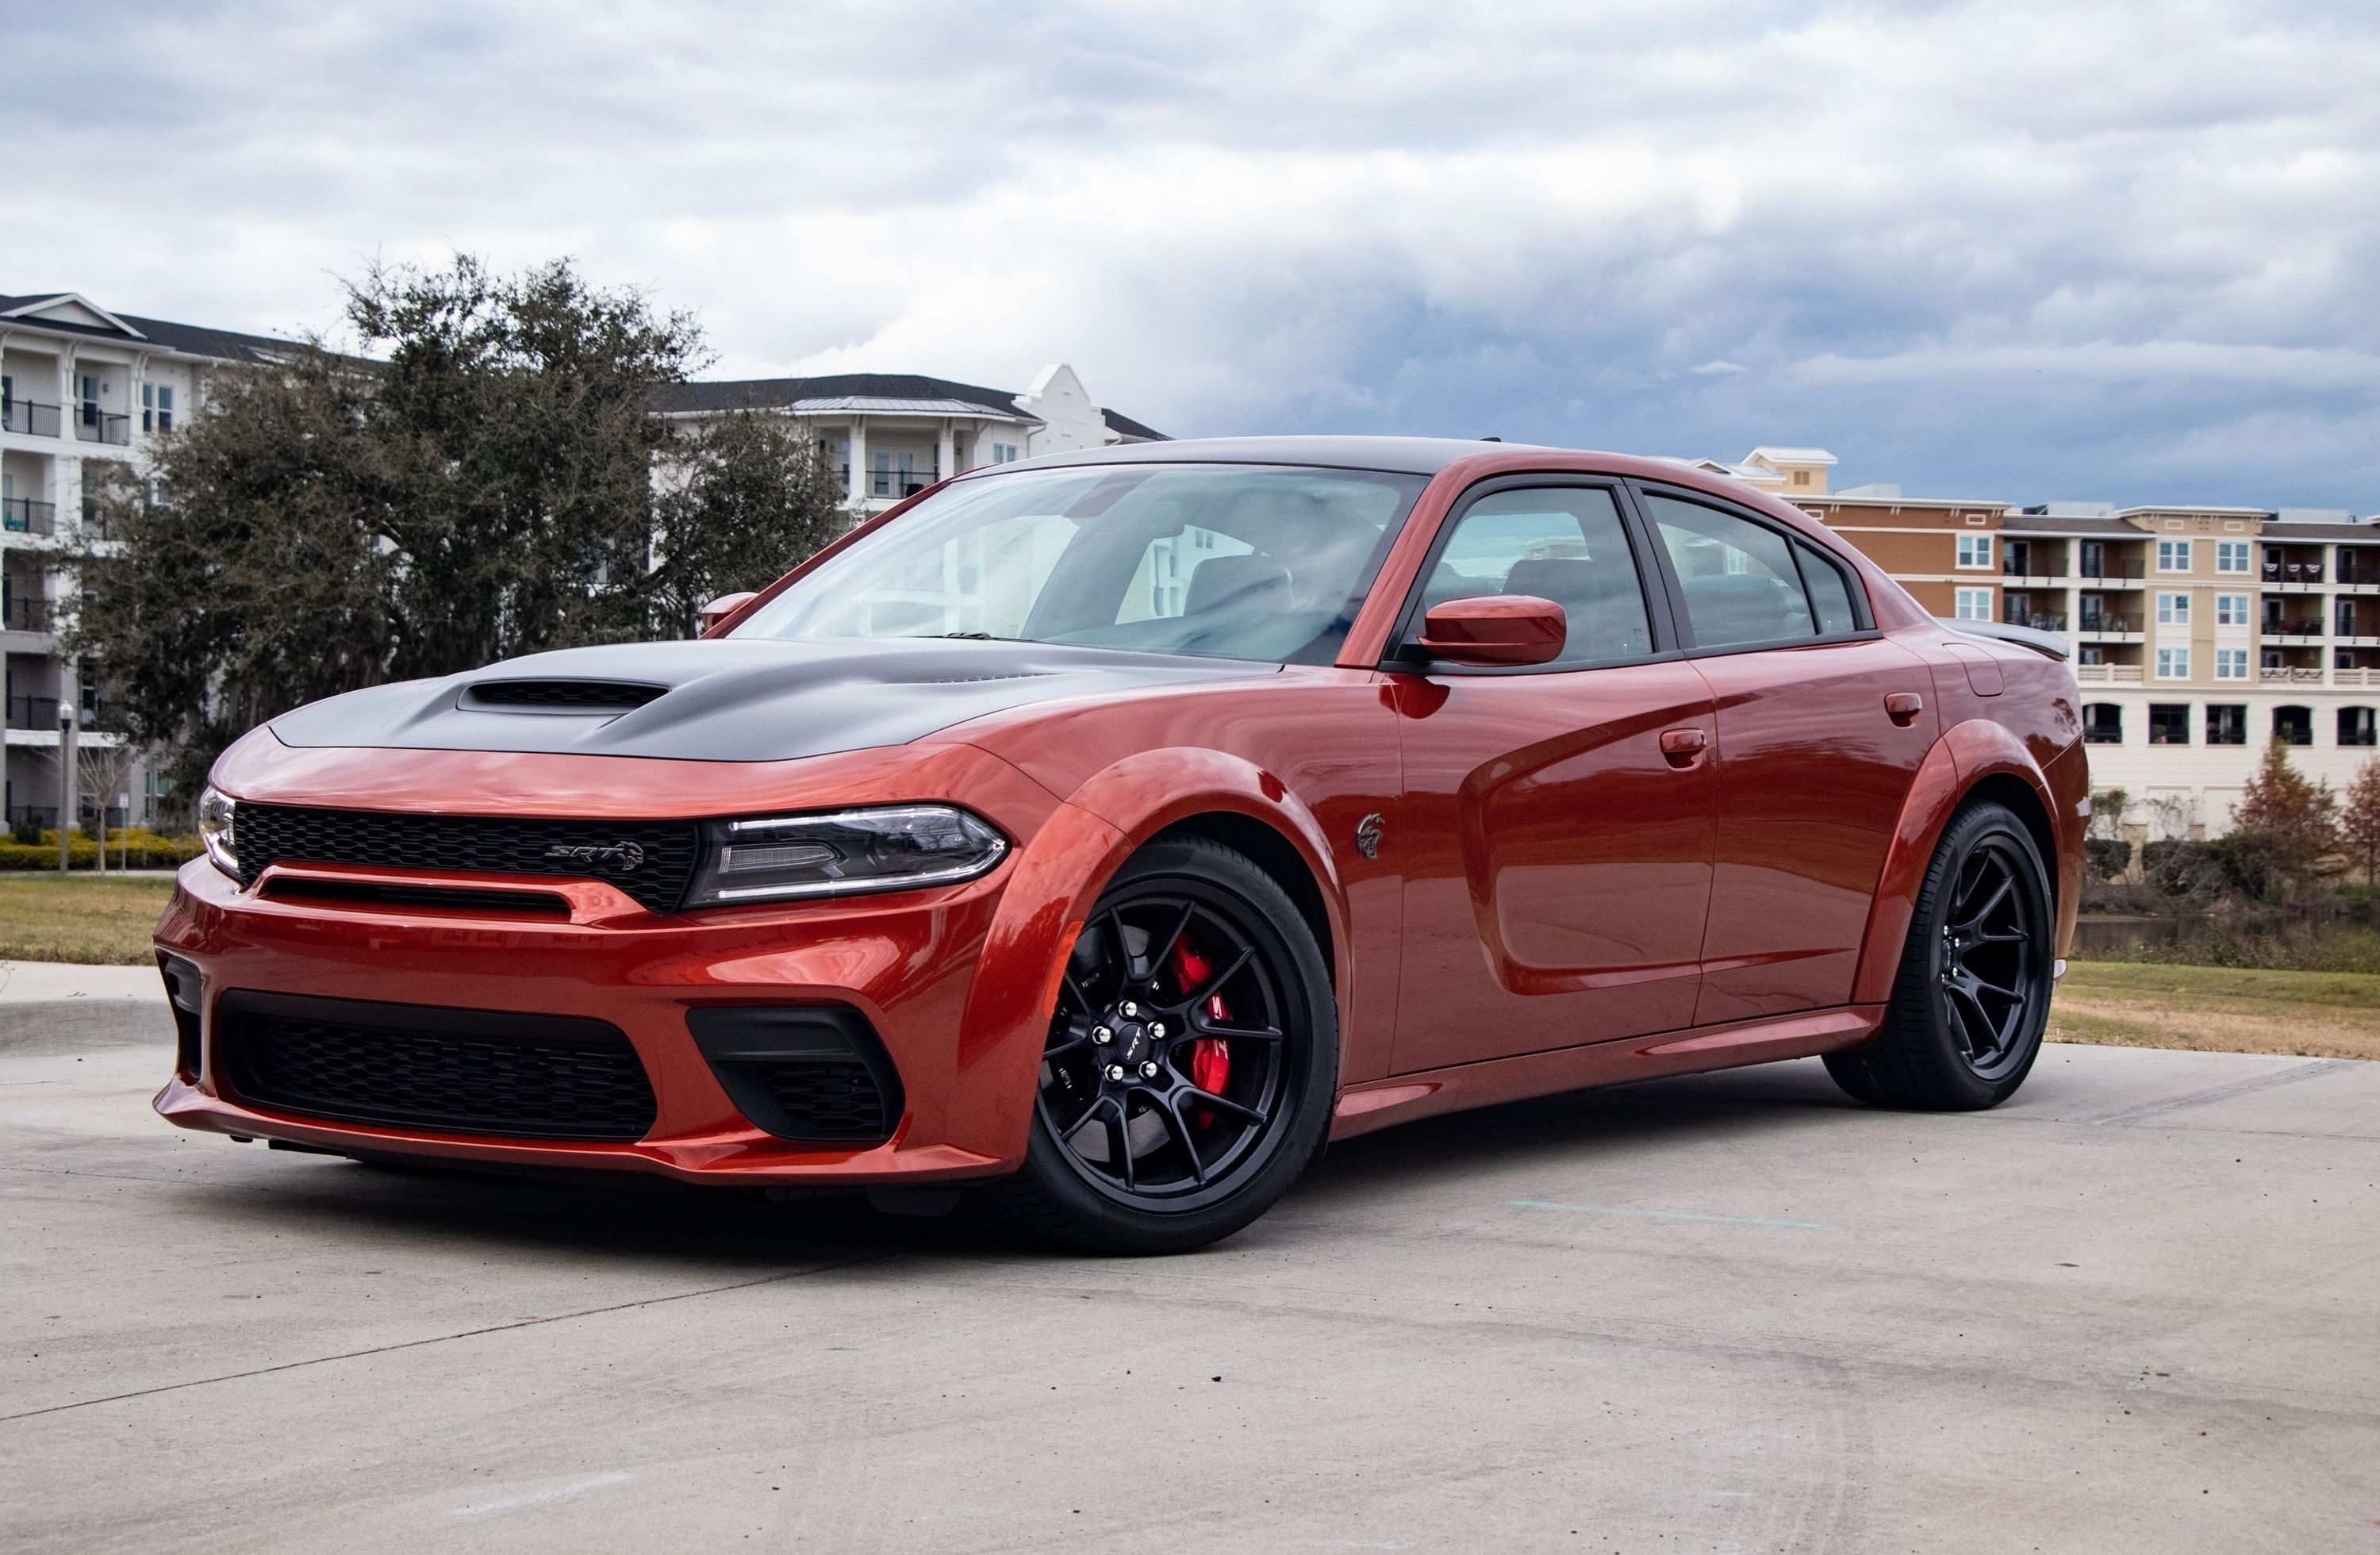 Is The Dodge Charger Hellcat Redeye Worth The Upgrade?